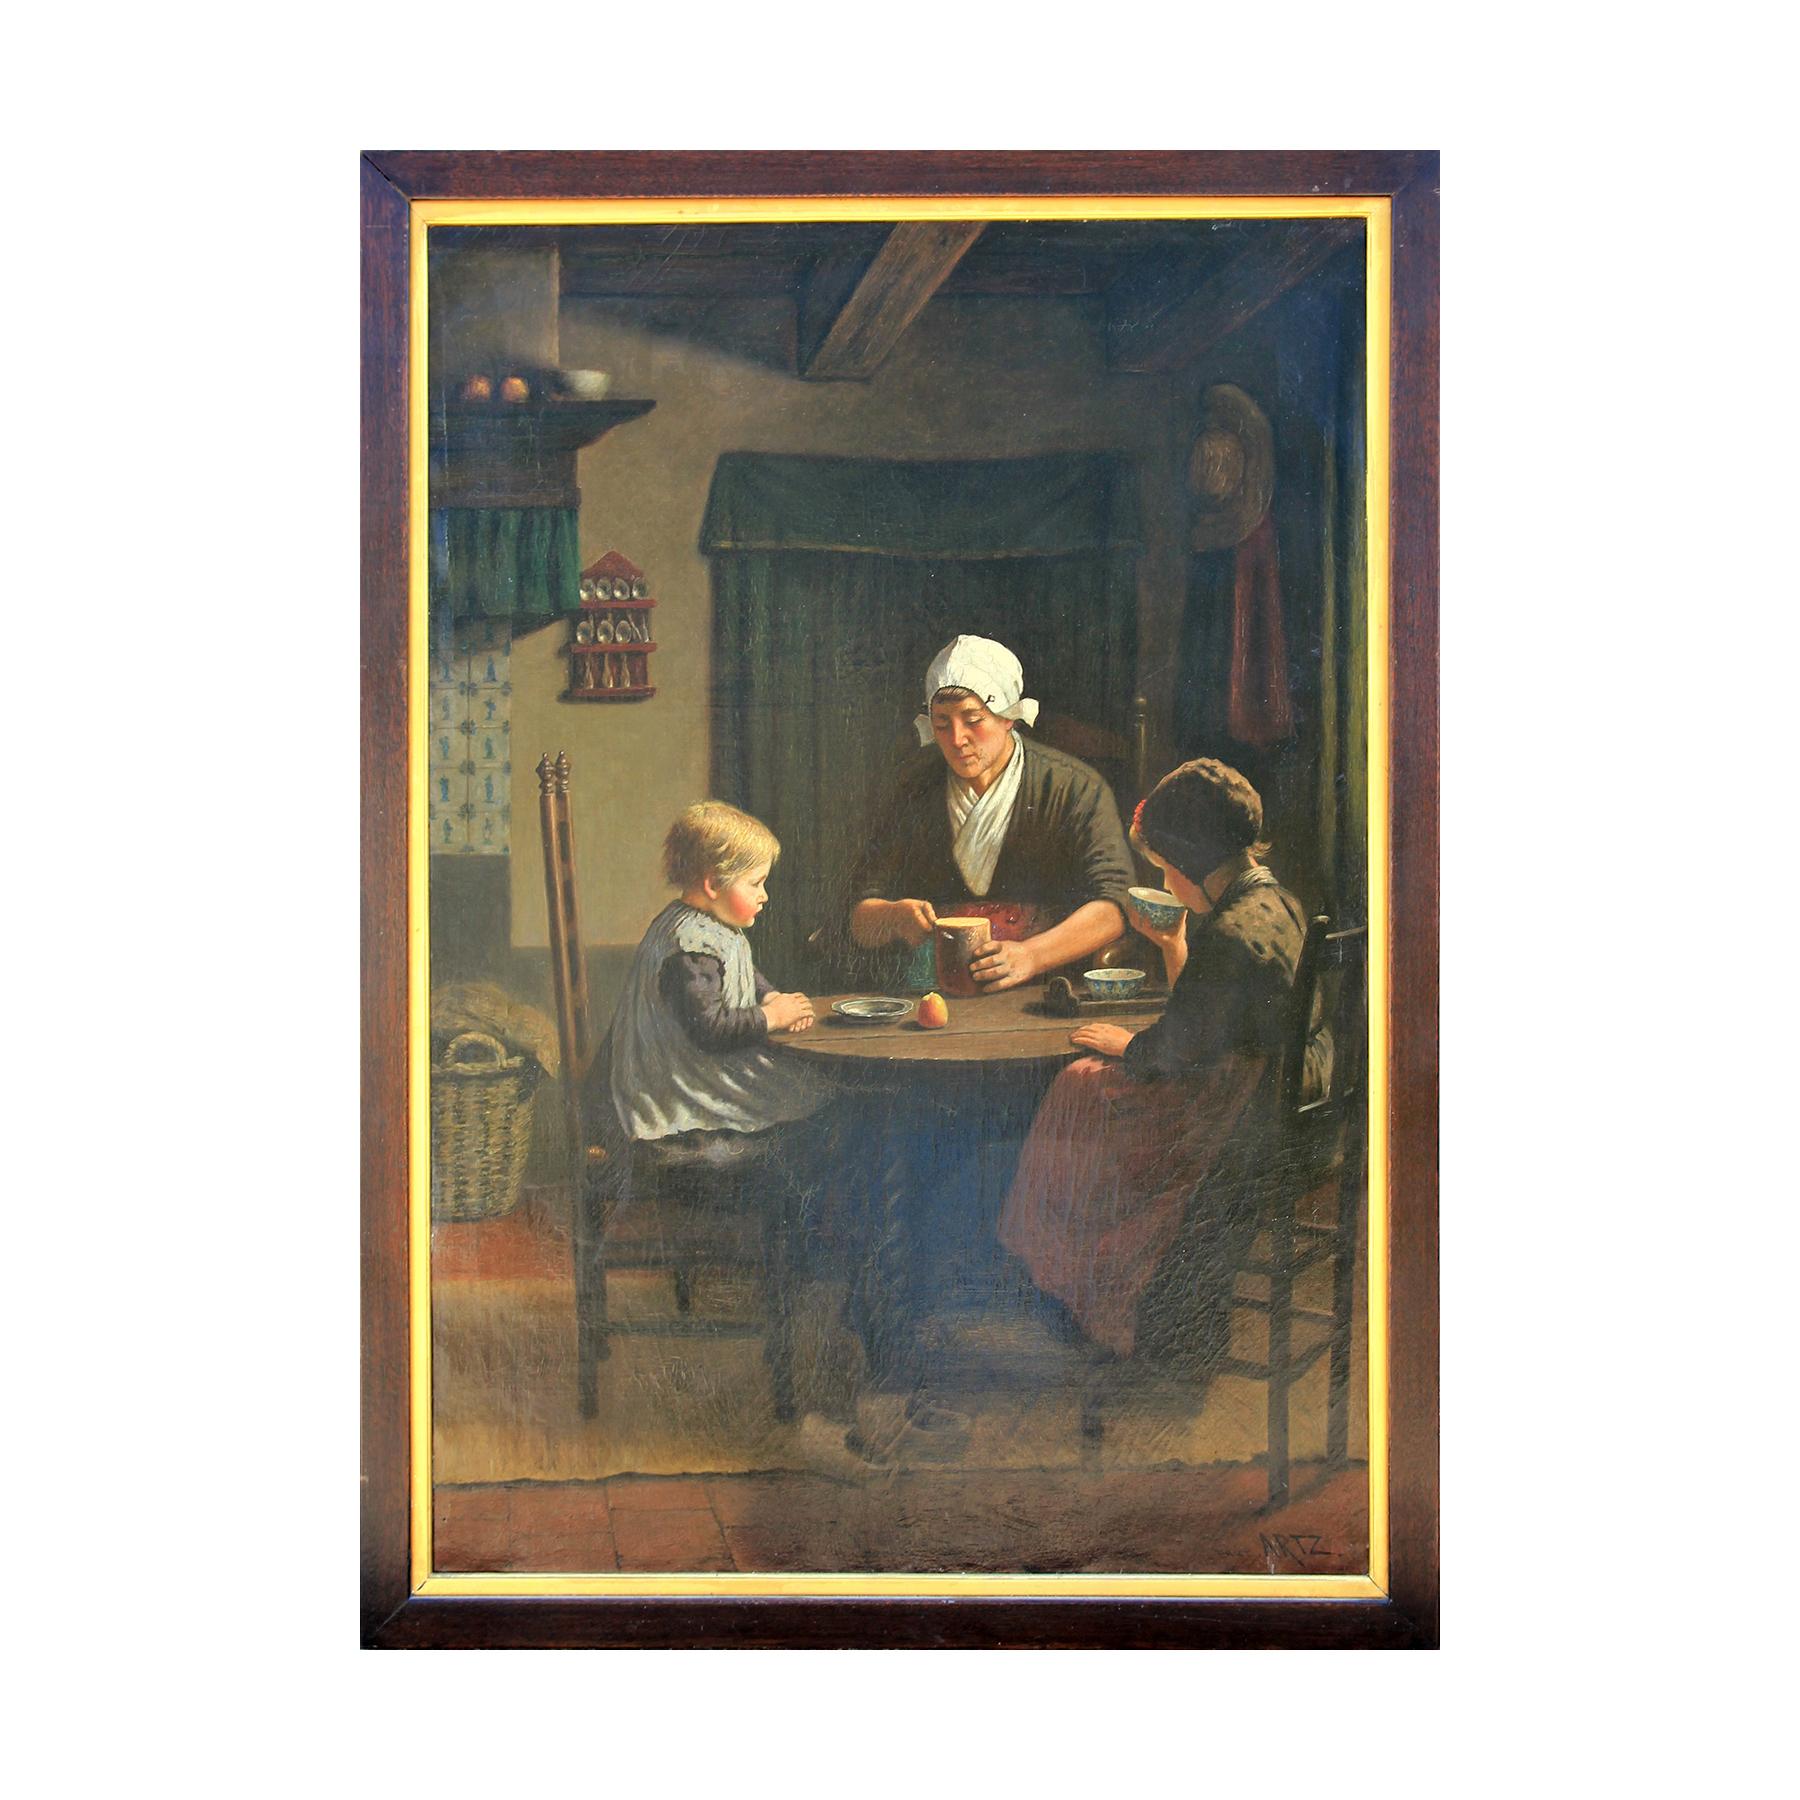 "Midday Meal" Portrait of Woman and Two Children Seated at Table